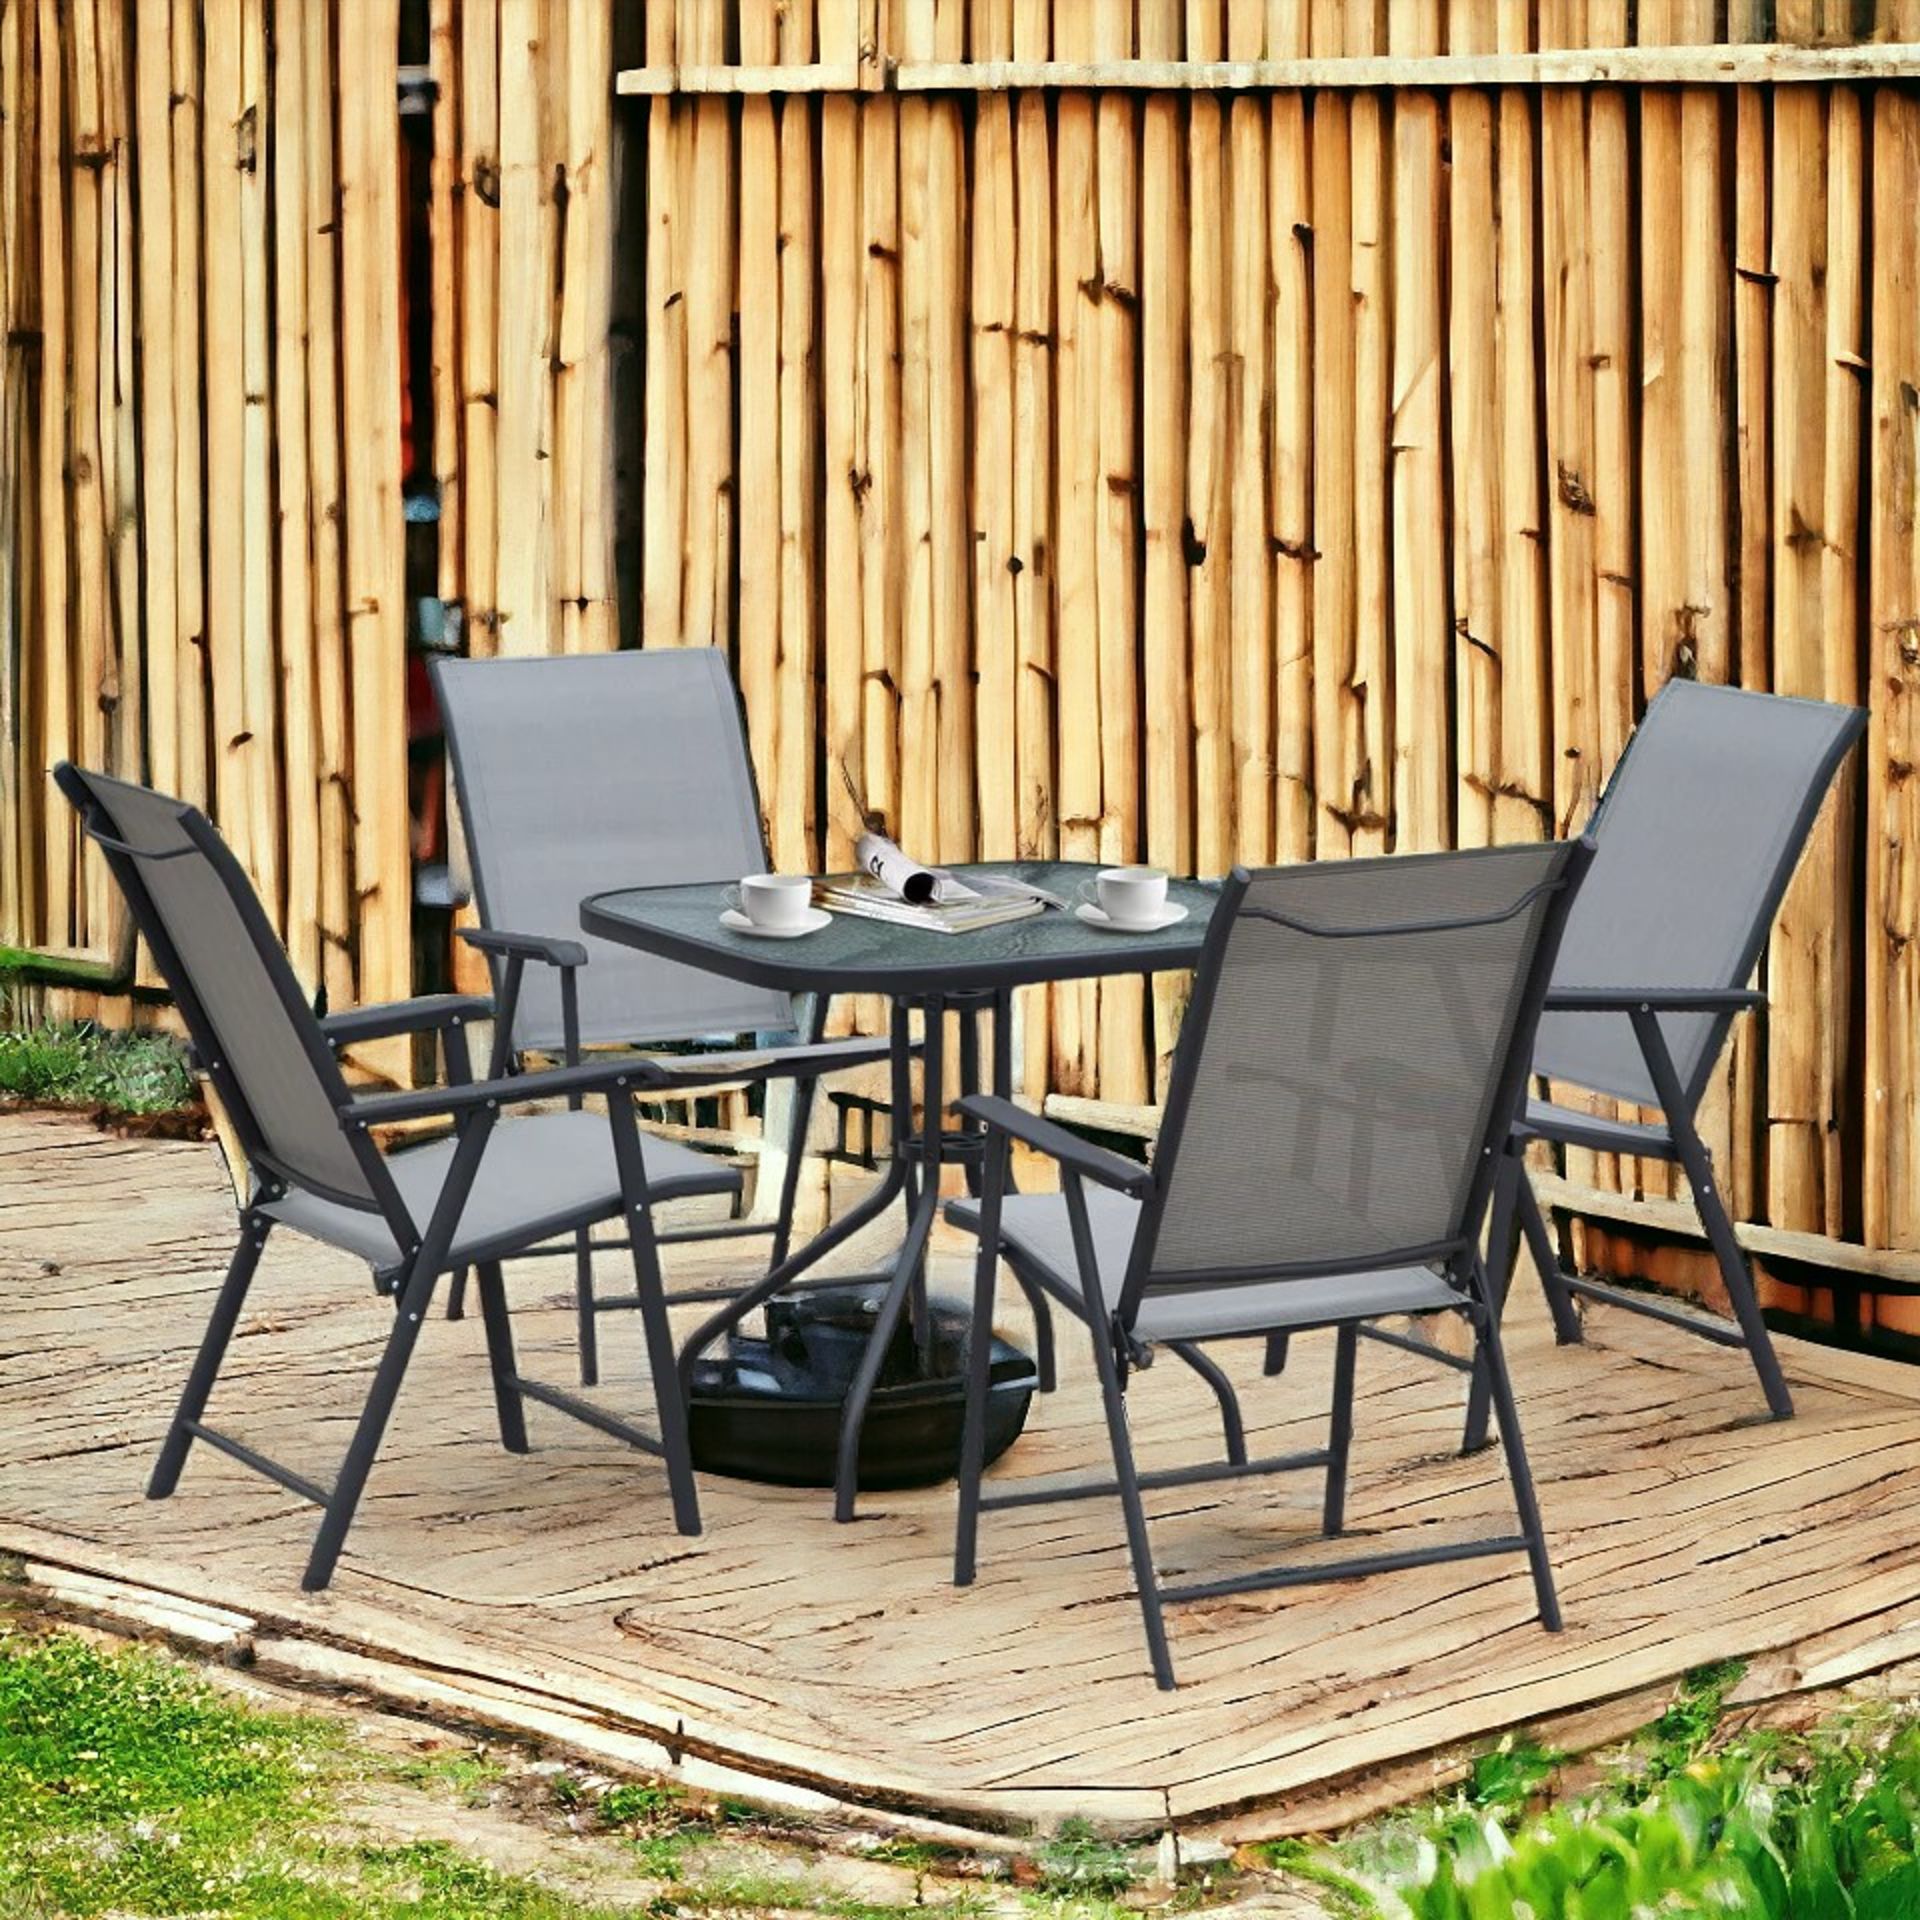 FREE DELIVERY -BRAND NEW 5PCS CLASSIC OUTDOOR DINING SET STEEL FRAMES W/ 4 CHAIRS COFFEE TABLE